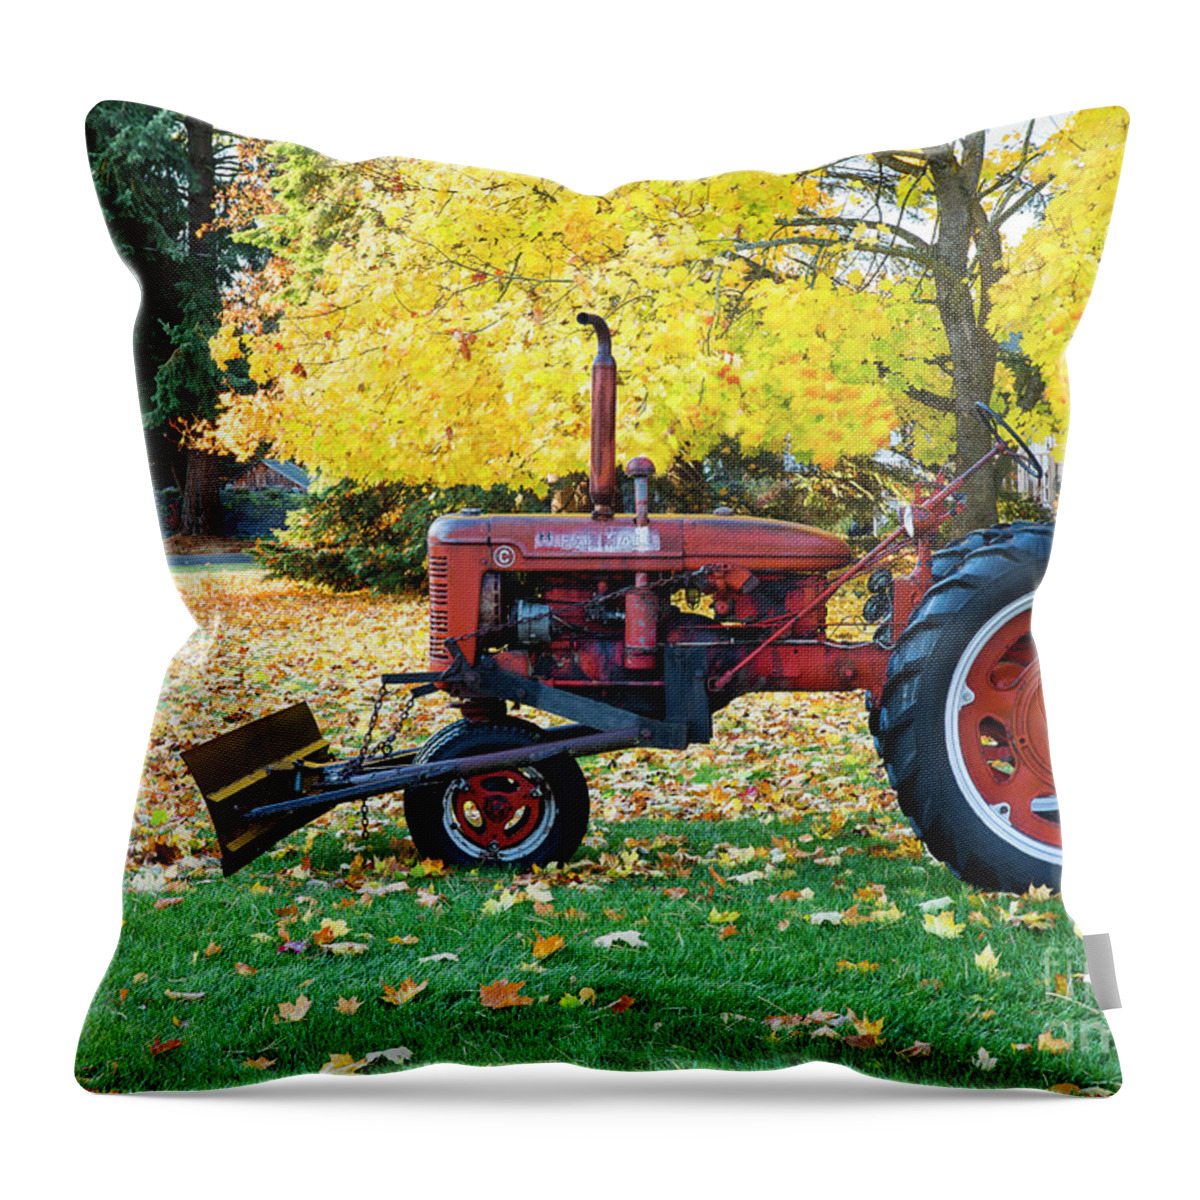 Coeur D'alene Throw Pillow featuring the photograph Red and Gold by Idaho Scenic Images Linda Lantzy